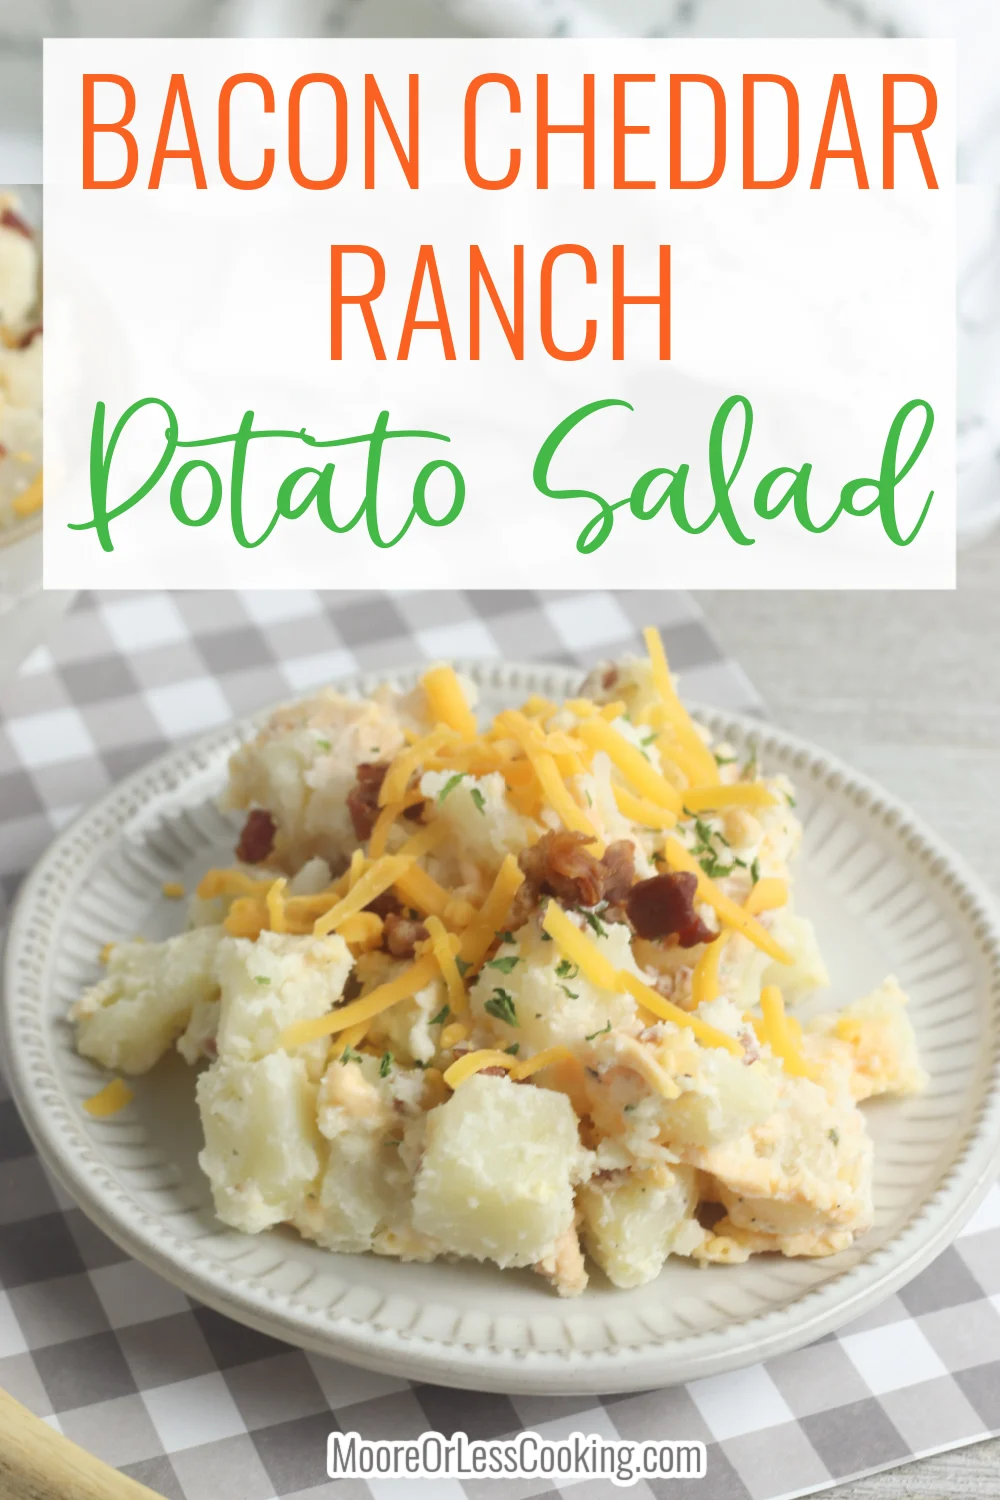 This potato salad recipe is loaded with all the ingredients that make it a crowd-pleaser - shredded cheddar cheese, crumbled salty bacon, a creamy dressing with a flavorful ranch twist, and tender potatoes. This recipe is also perfect for adding in even more delicious ingredients if you want to experiment with layering on other flavors. via @Mooreorlesscook